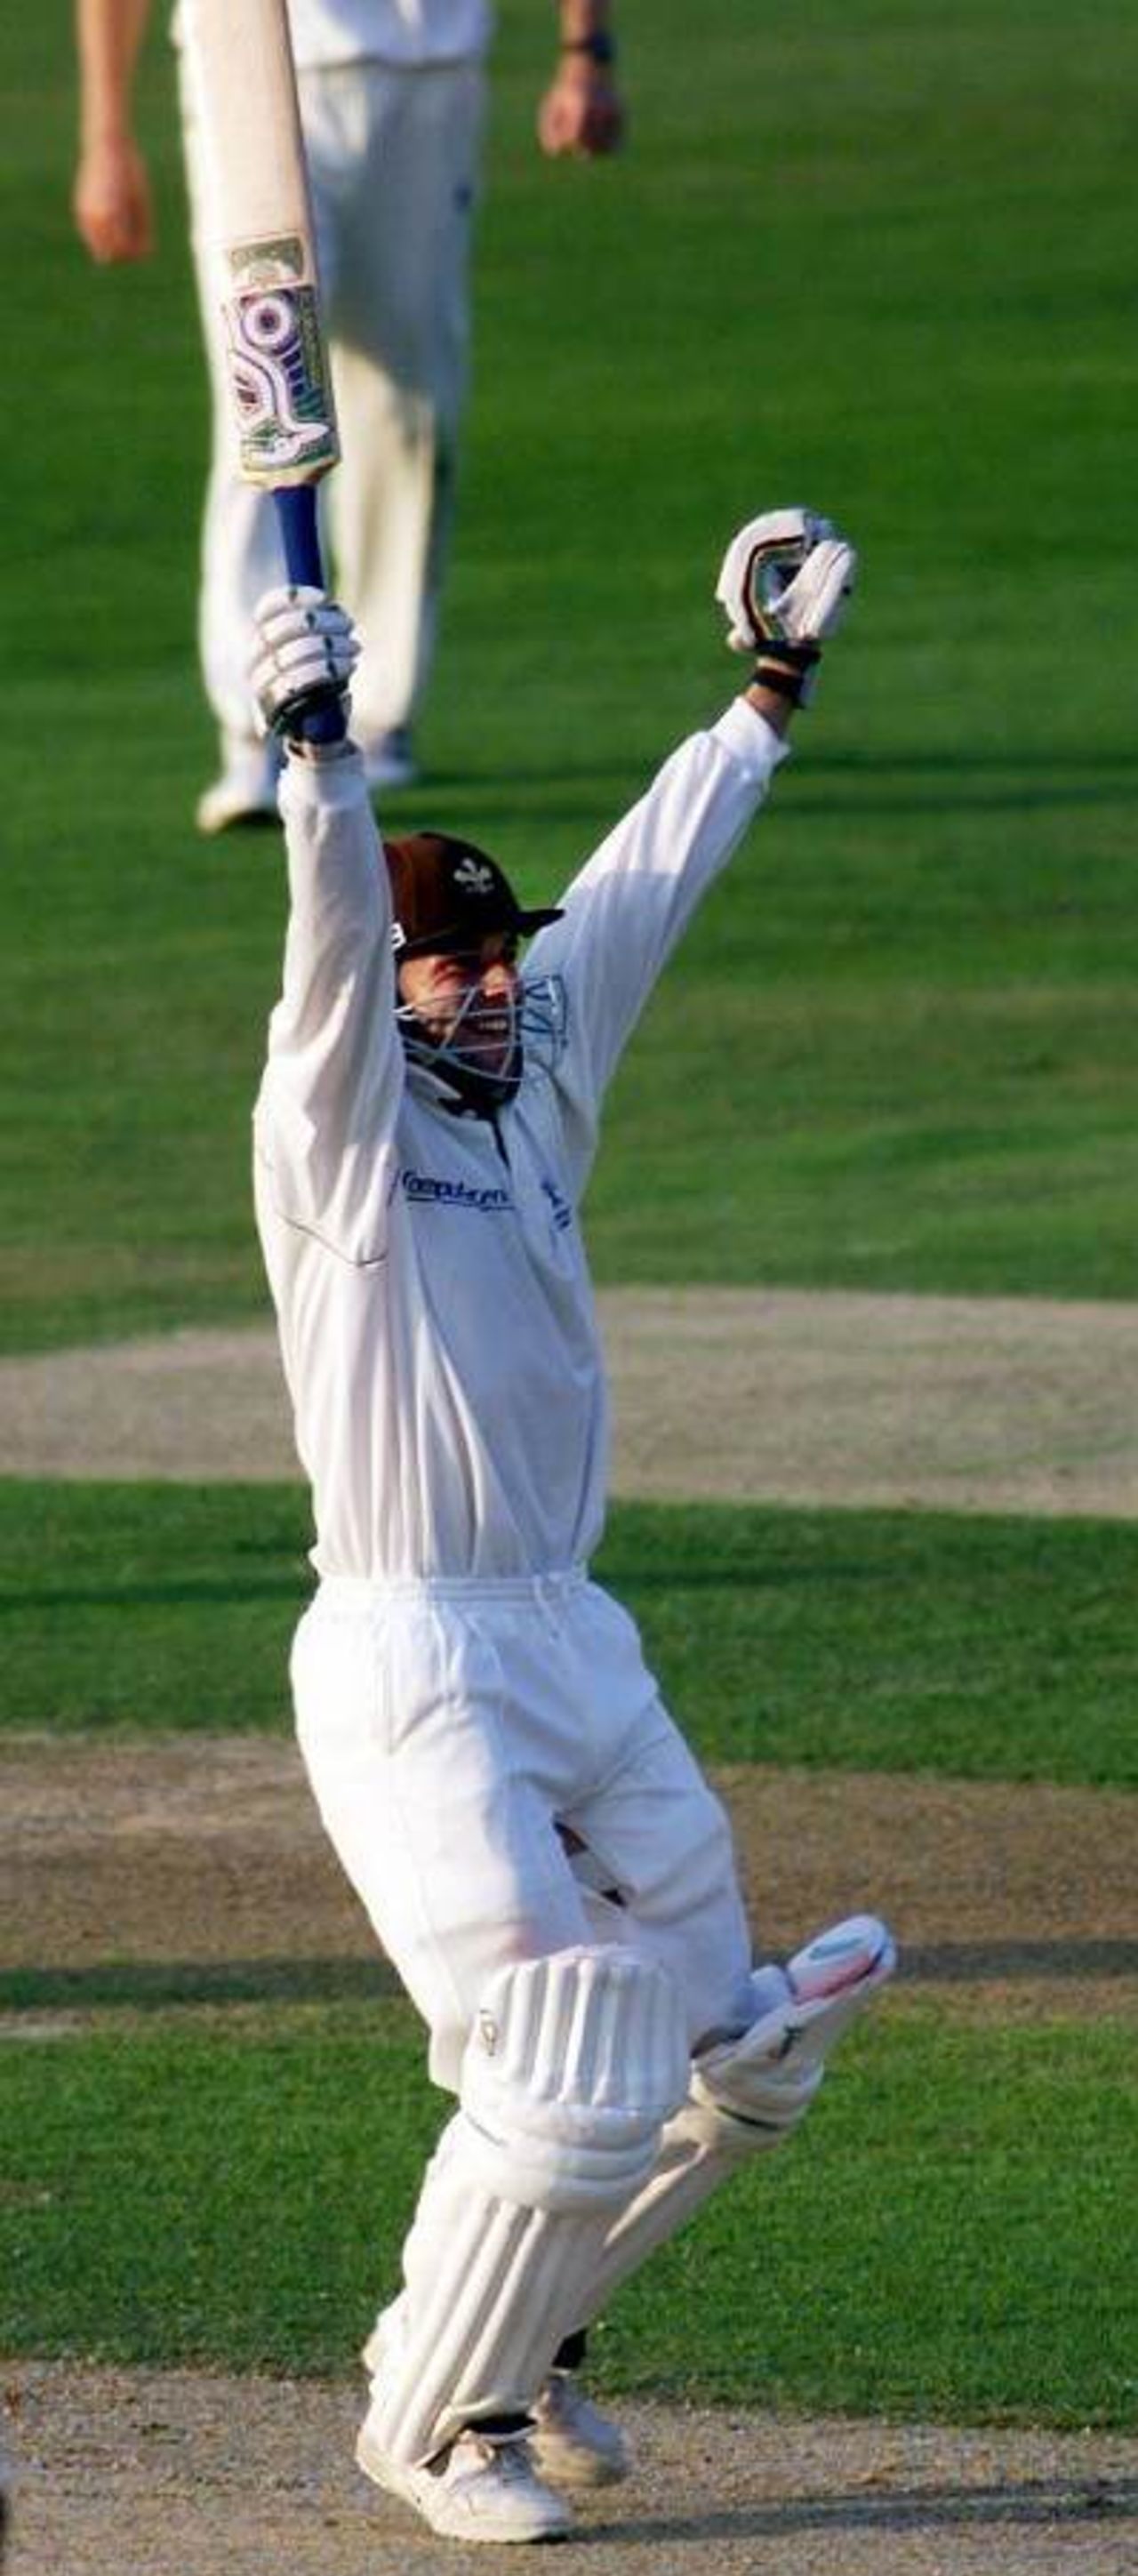 2 Sep 1999: Surrey's Ian Ward celebrates after hitting the winning run to win the County Championship match against Notts, at the Oval.